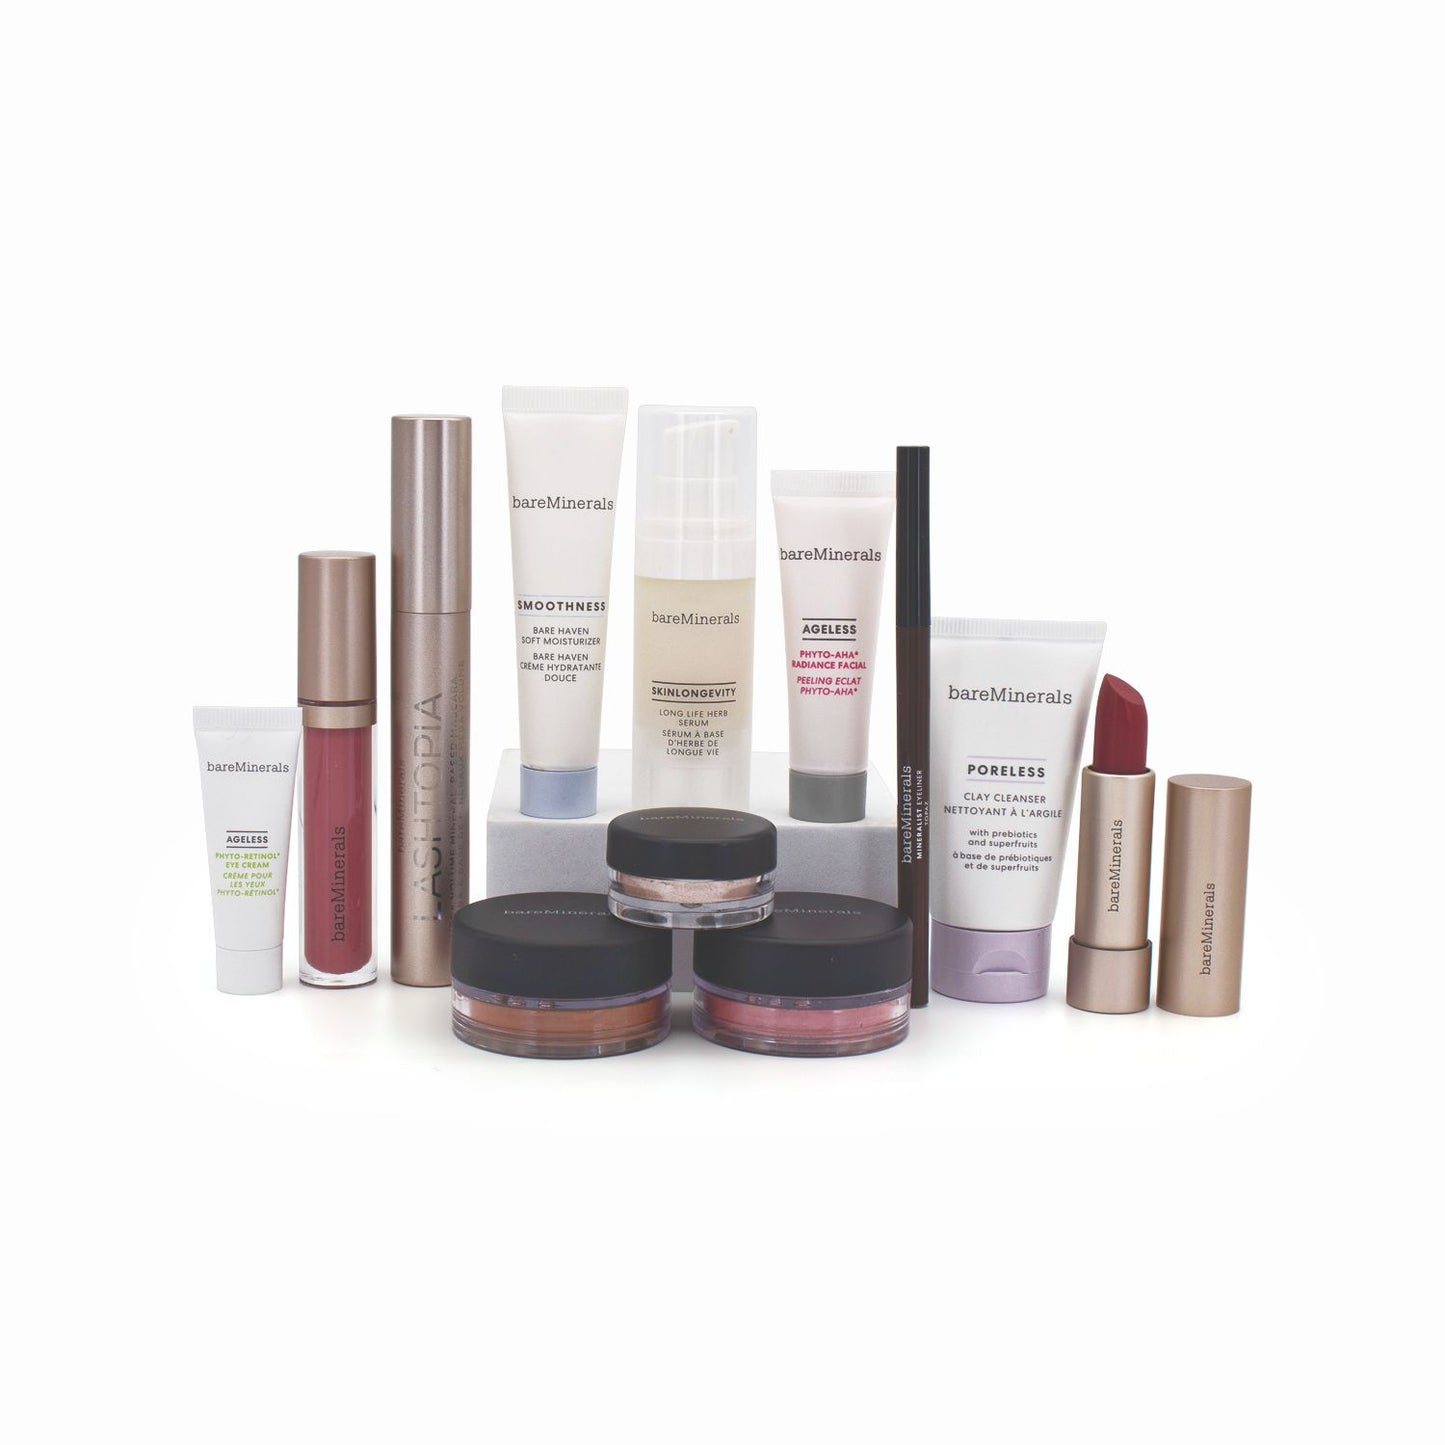 bareMinerals All The Good Things 12 Piece Clean Beauty Set - Imperfect Box